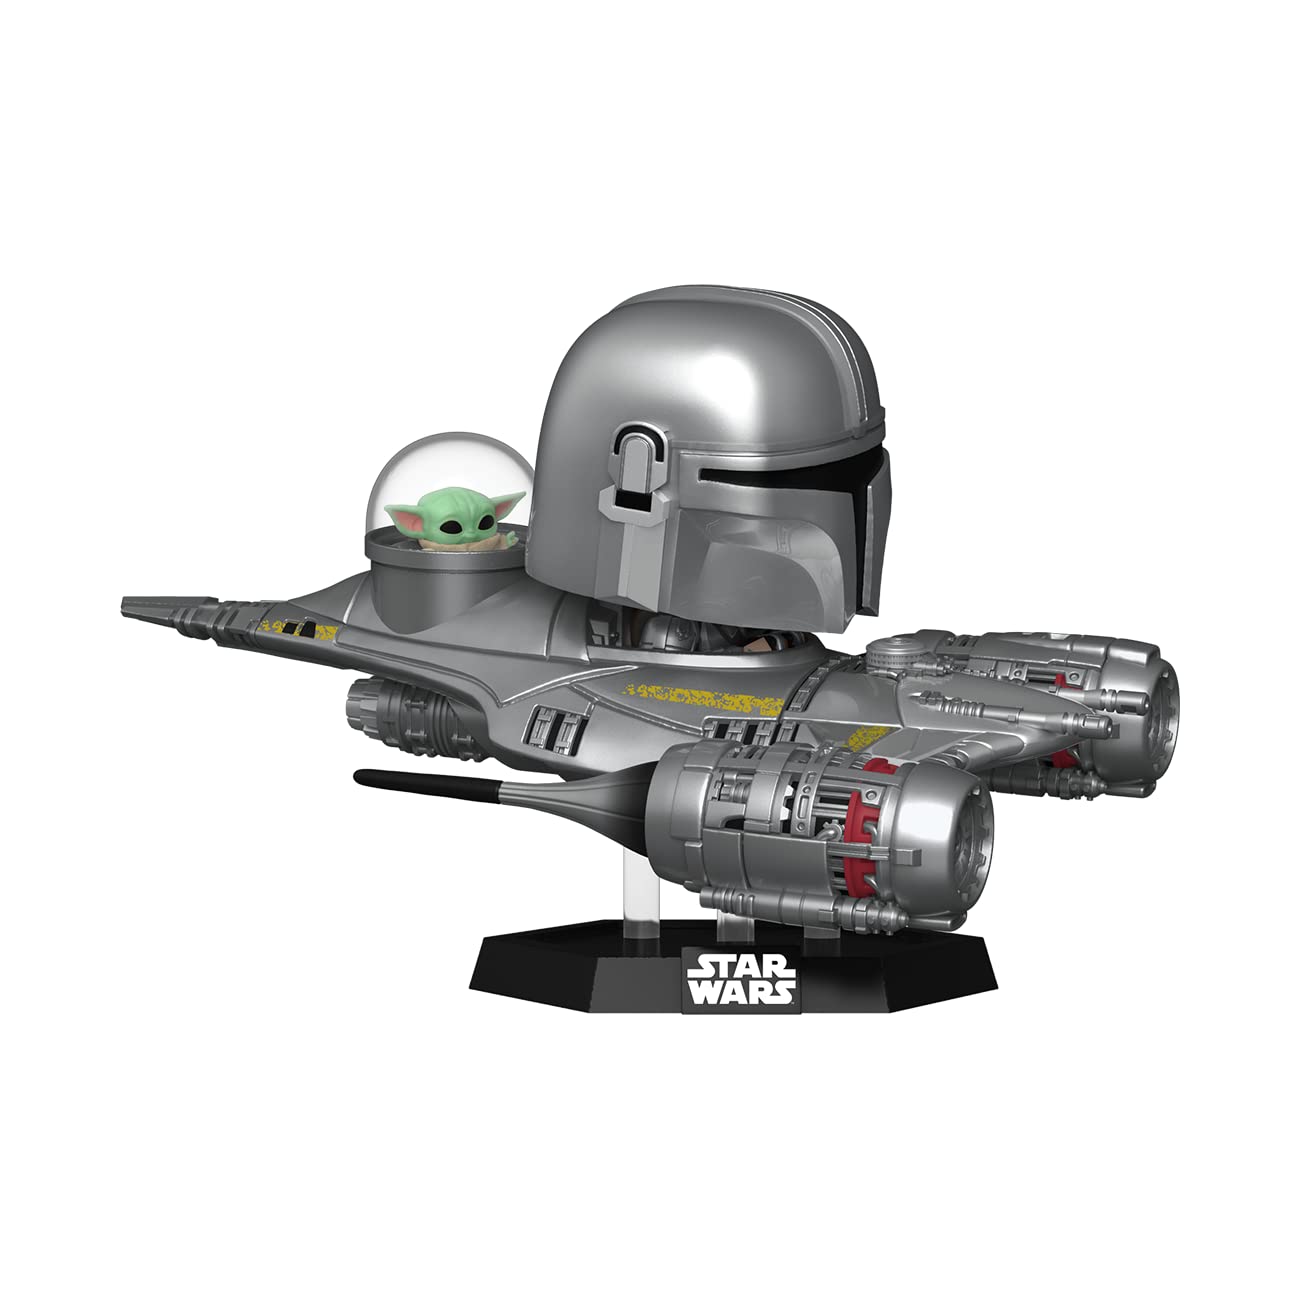 Limited-time deal: Funko Pop! Ride Super Deluxe: Star Wars Hyperspace Heroes - The Mandalorian in N1 Starfighter (with Grogu), Amazon Exclusive - $10.49